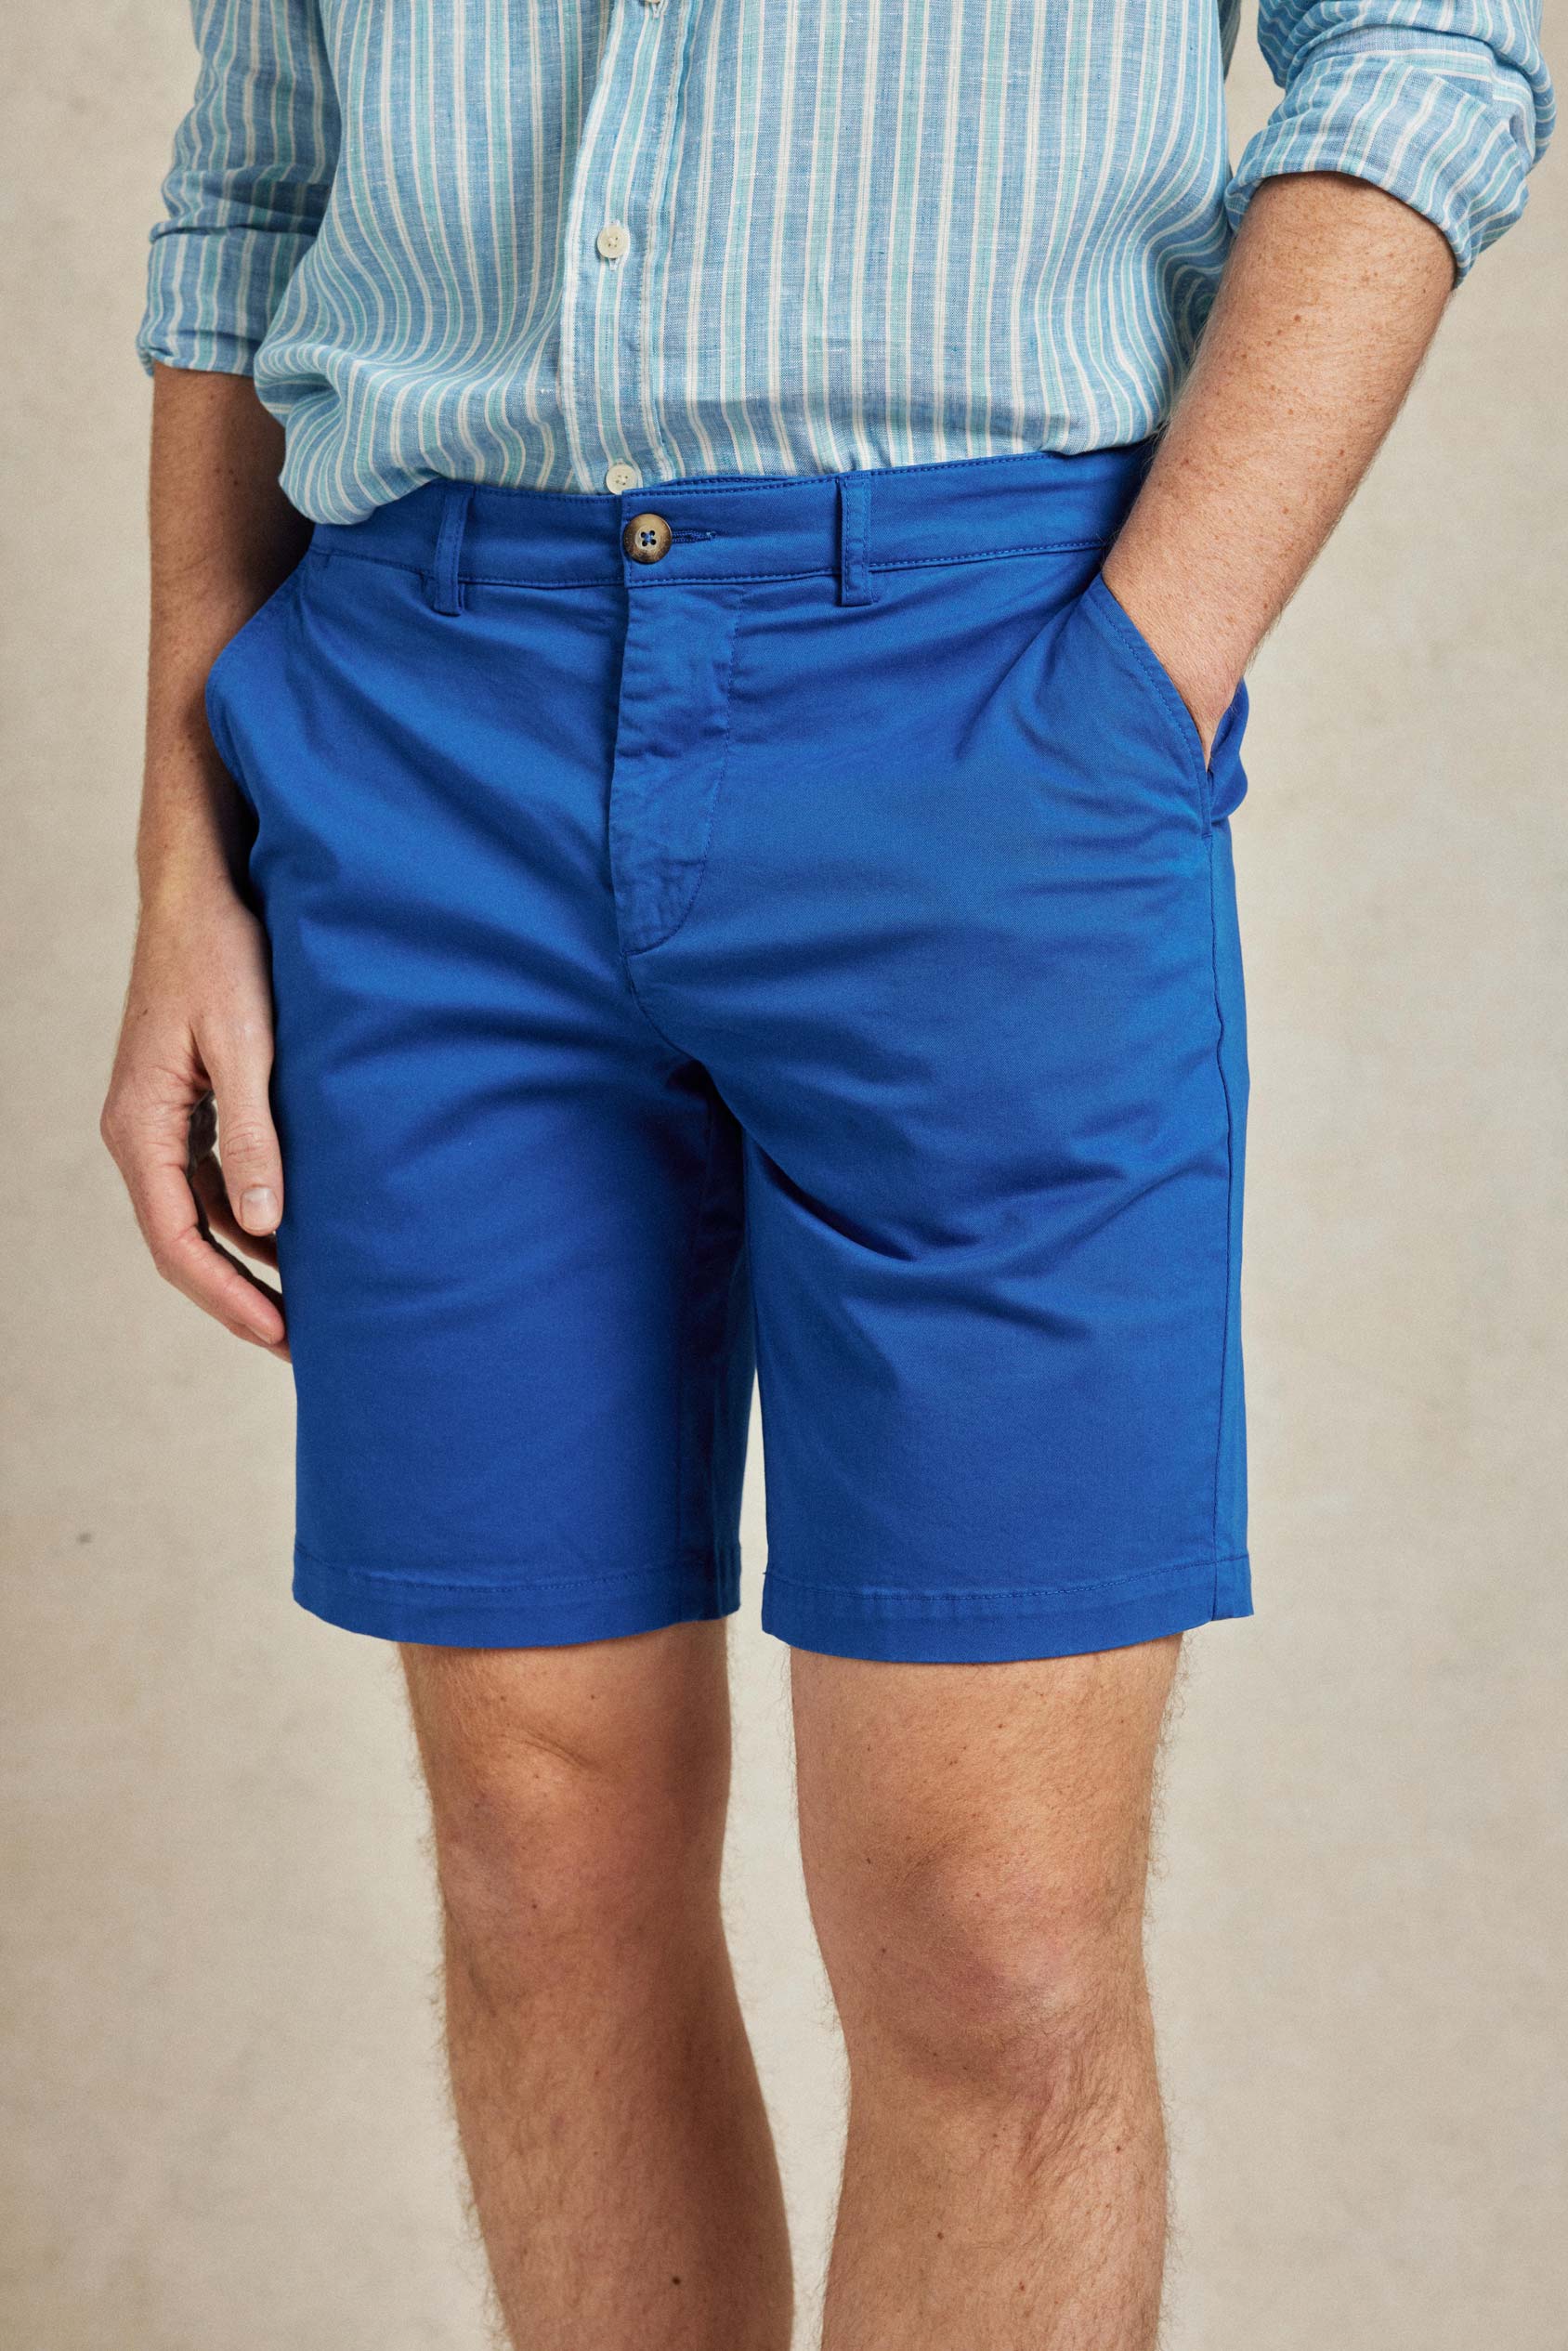 Garment dyed classic cobalt blue men’s chino shorts with side and back pockets. Cut with a hint of stretch. Casual wear. Made in Portugal. Machine wash. Size 30,32,34,36,38.